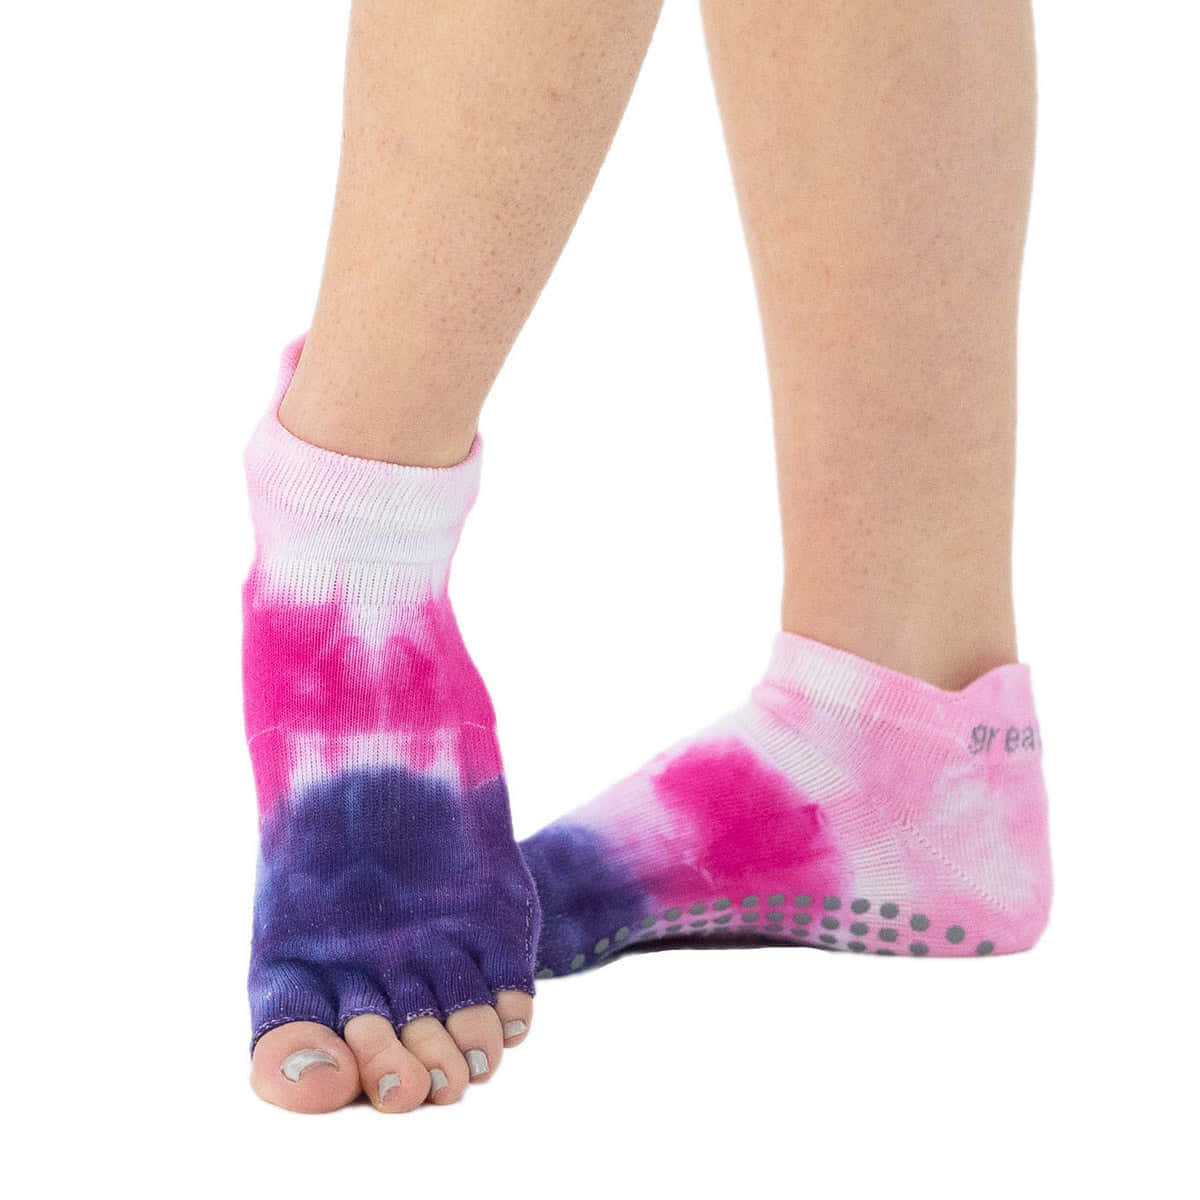 Step Into Comfort and Style in Purple Socks!" Wallpaper